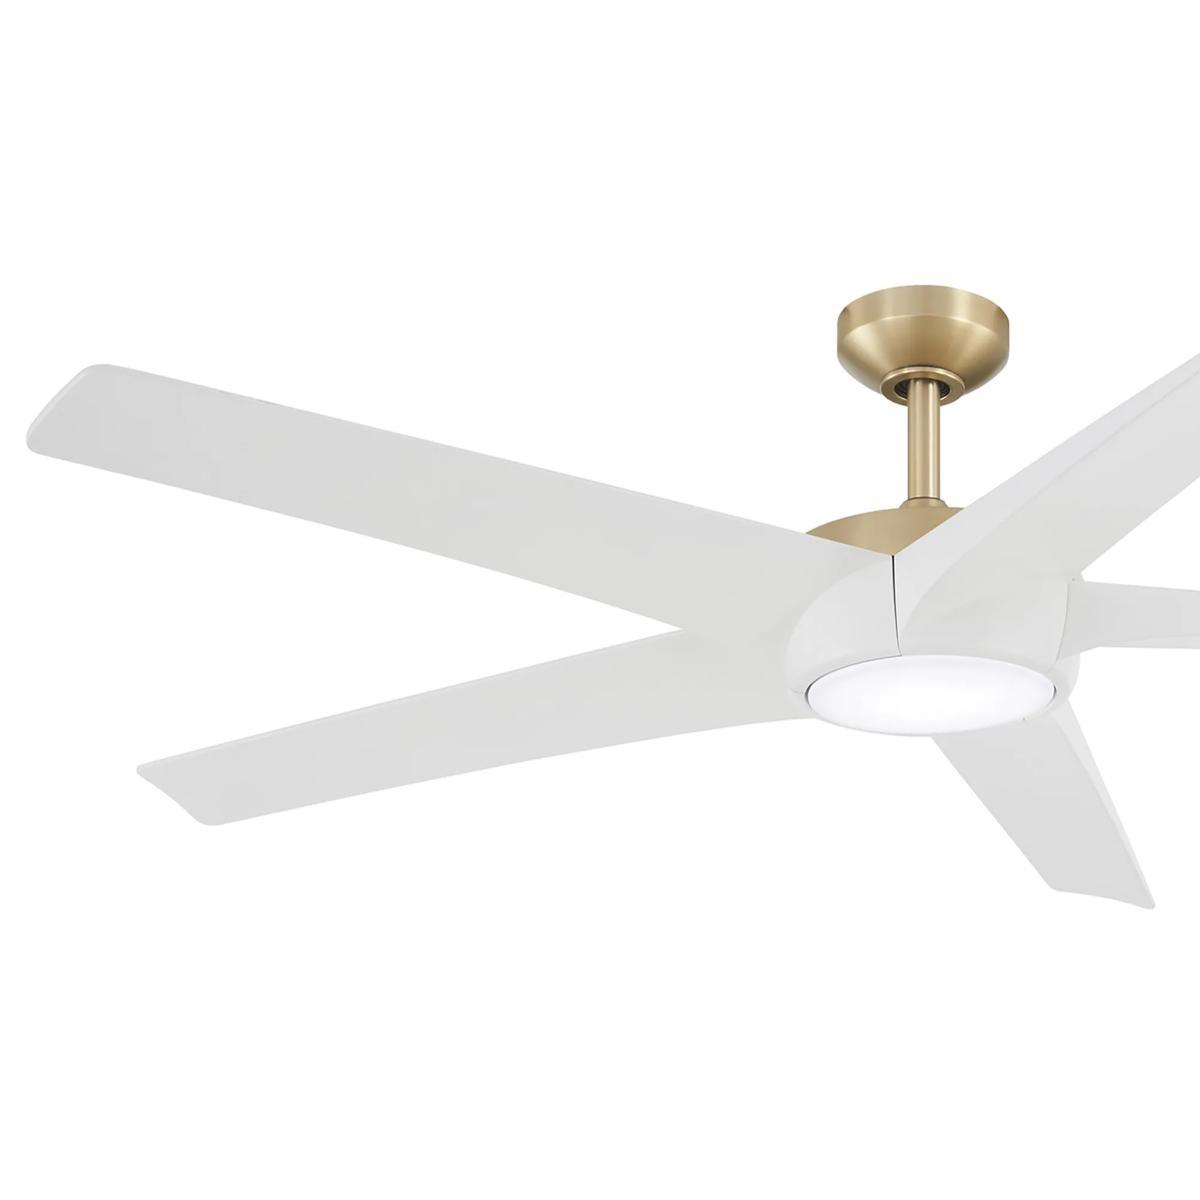 Skymaster 64 Inch LED Ceiling Fan with Light Kit and Remote, Soft Brass with Flat White Blades - Bees Lighting